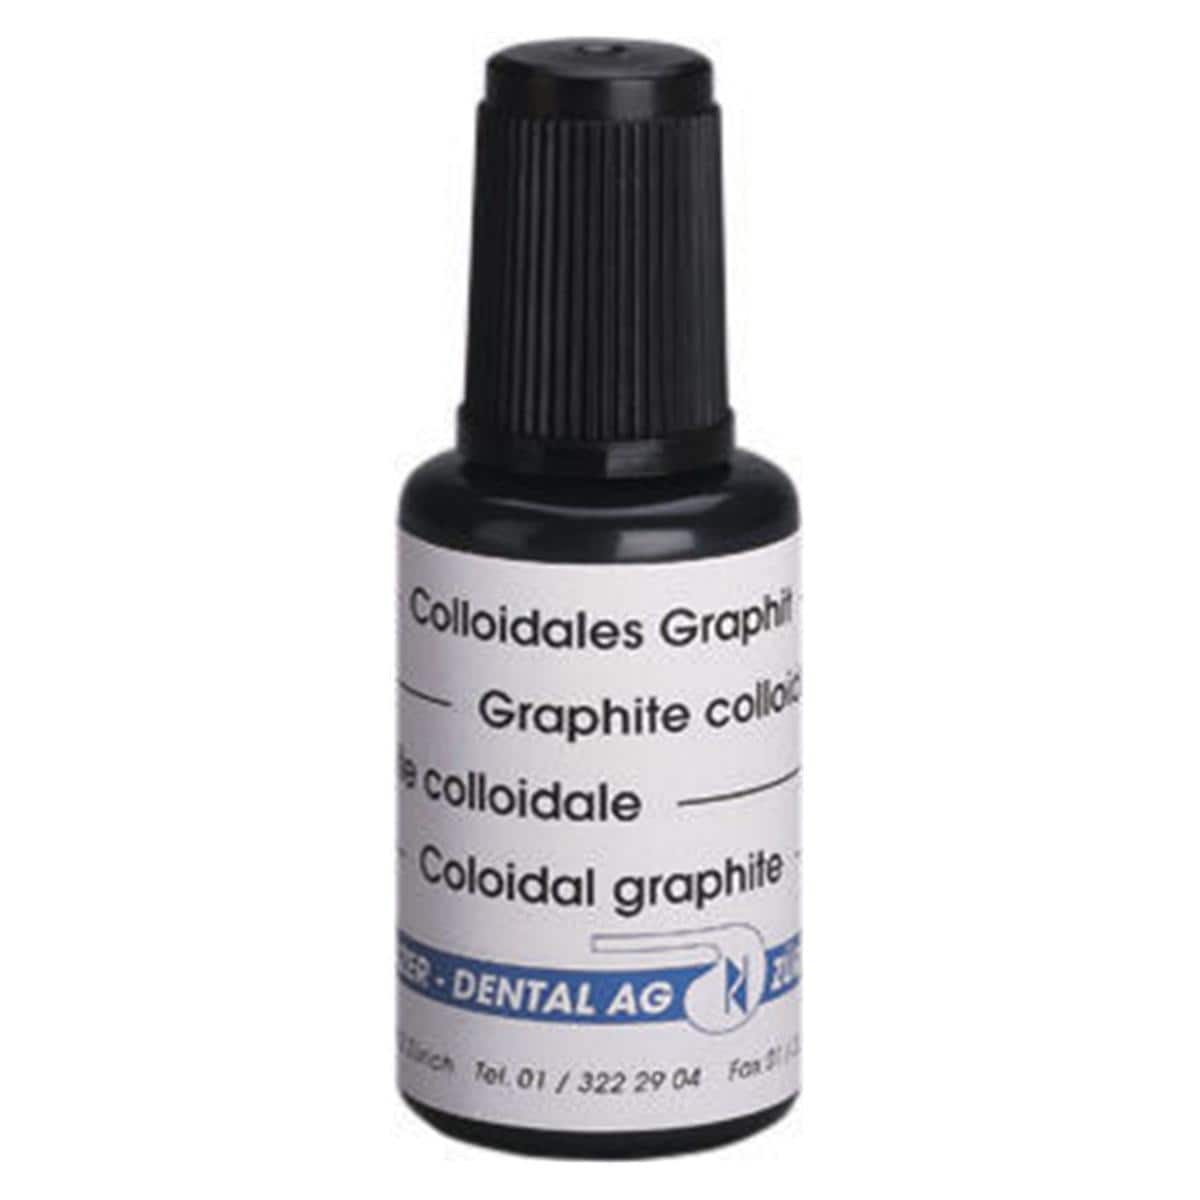 Colloidales Graphit - Pinselflasche 20 ml